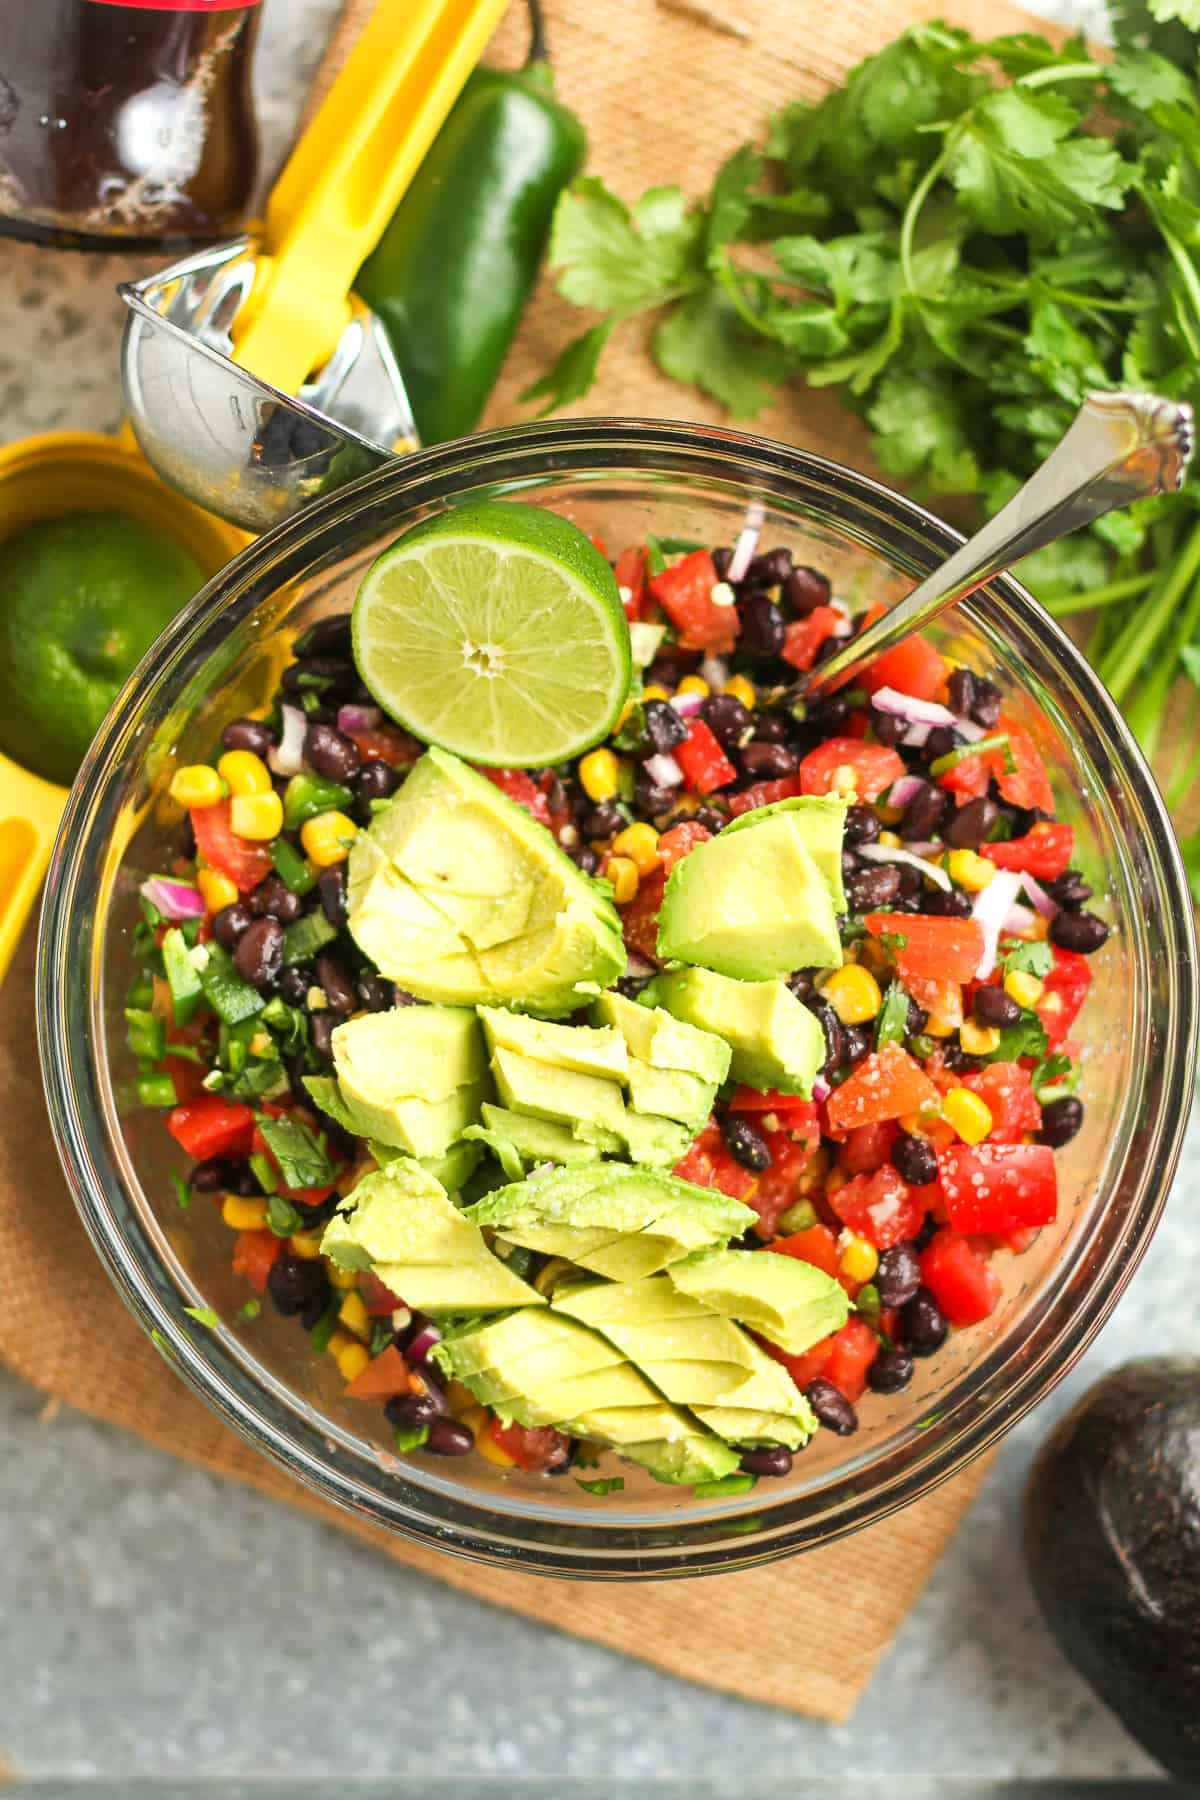 A bowl of the cowboy caviar, with the diced avocado on top.